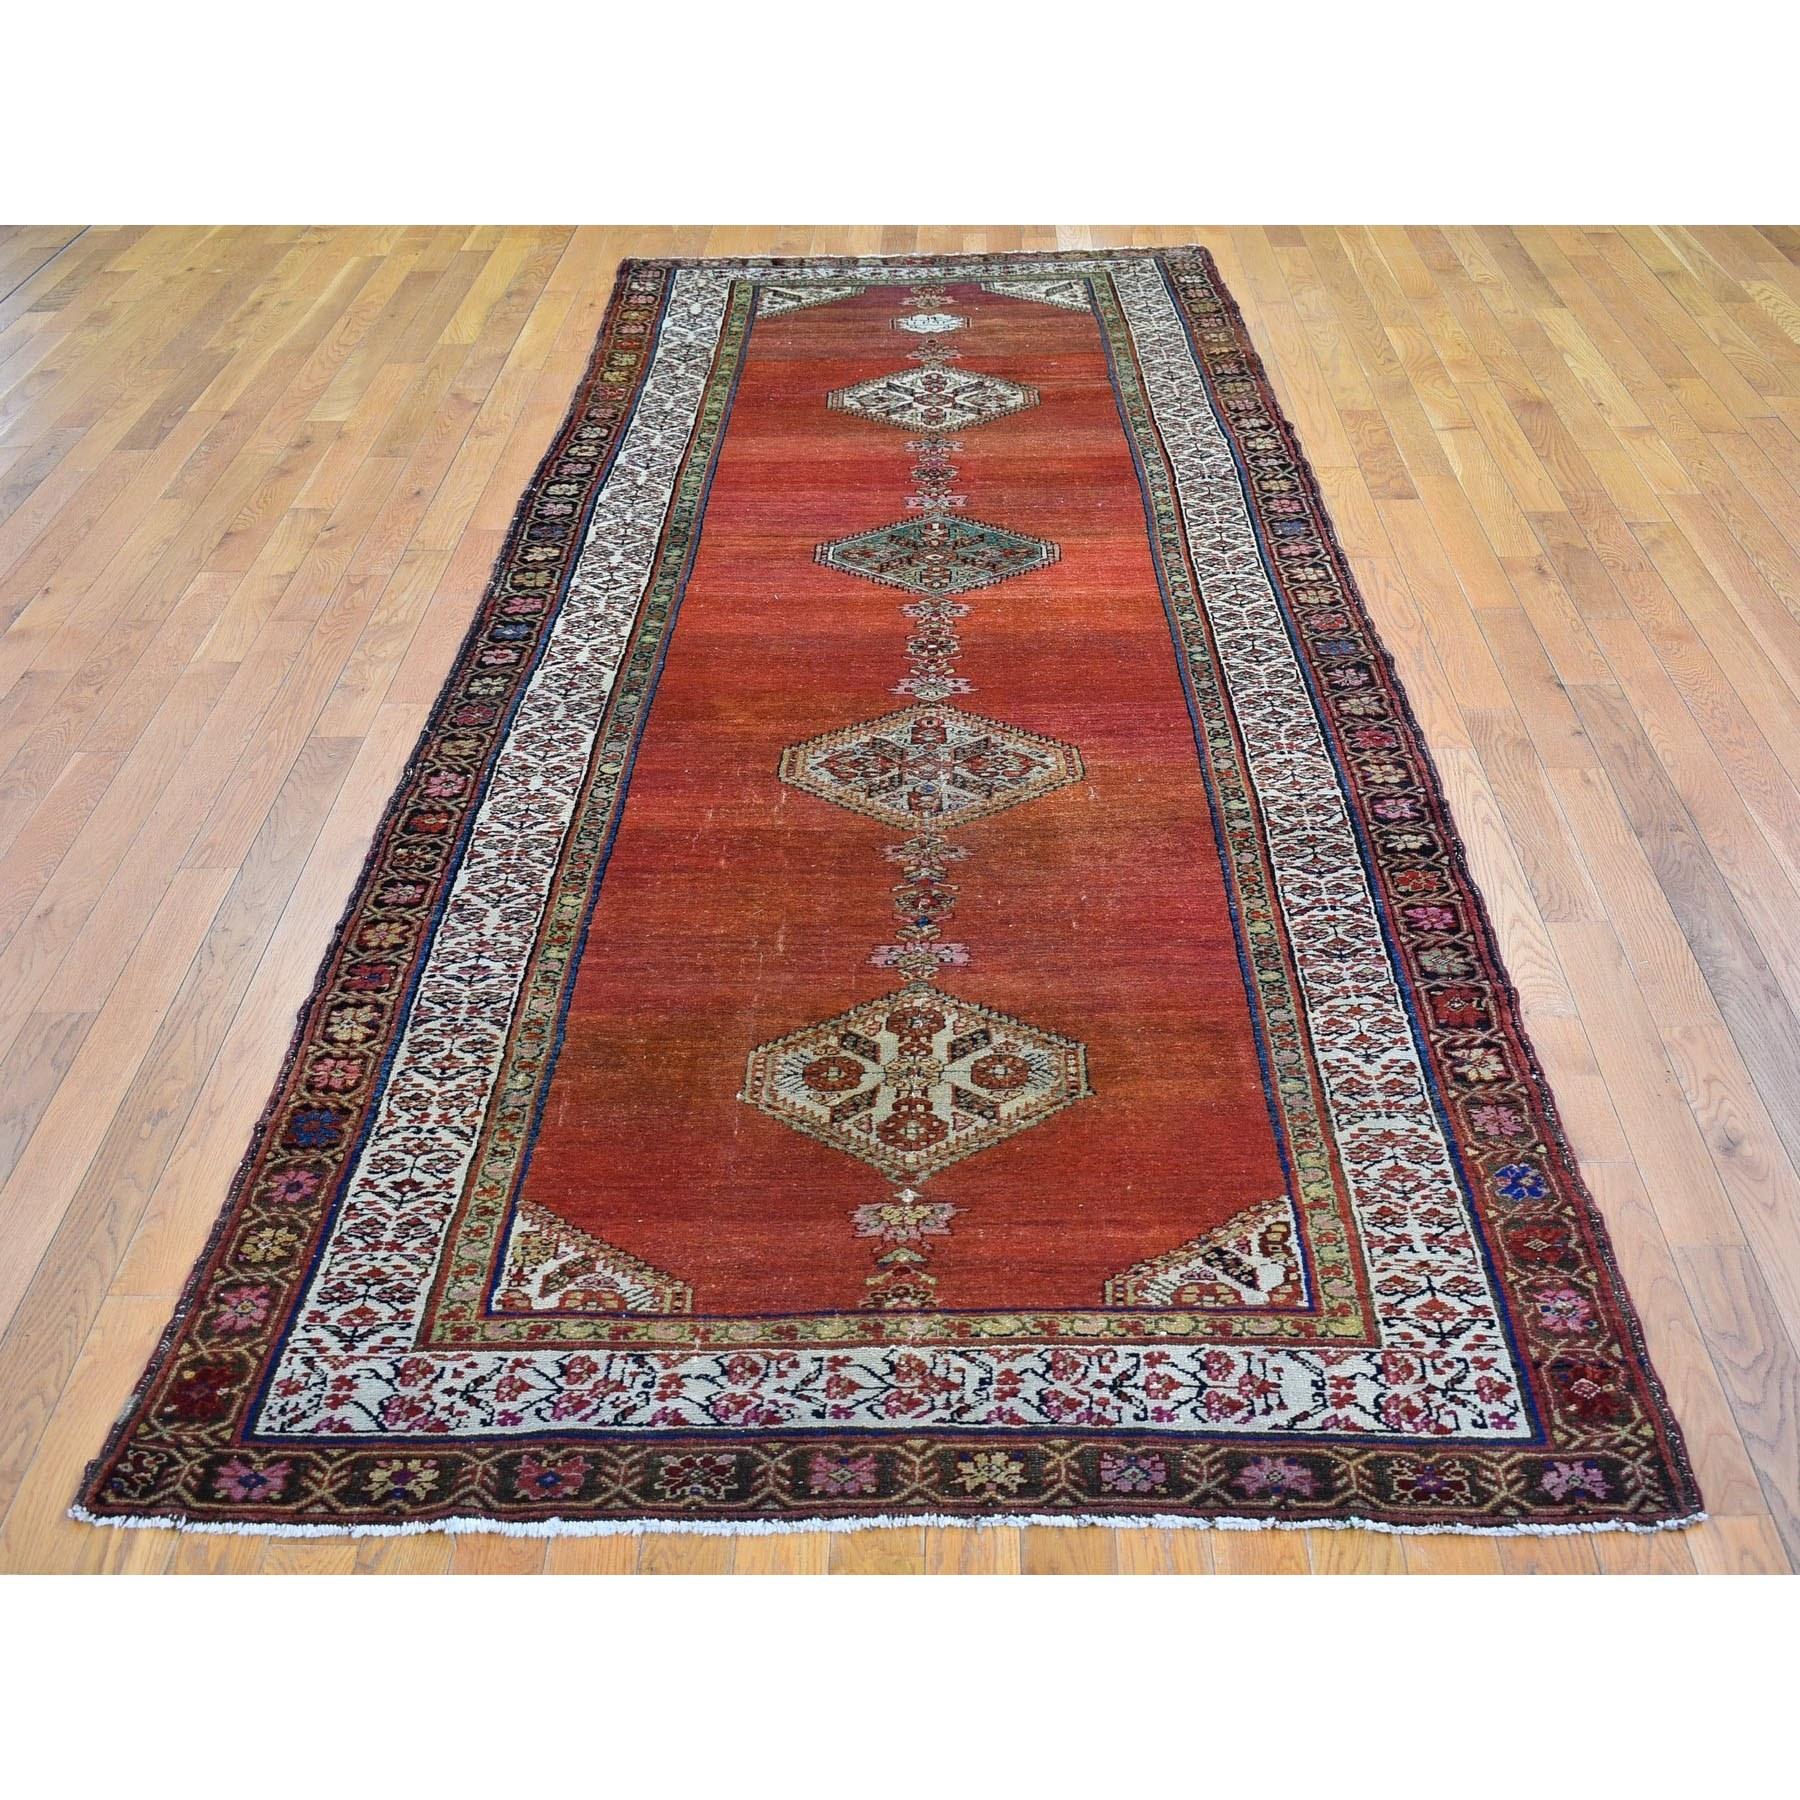 This fabulous hand-knotted carpet has been created and designed for extra strength and durability. This rug has been handcrafted for weeks in the traditional method that is used to make
Exact rug size in feet and inches : 4'8